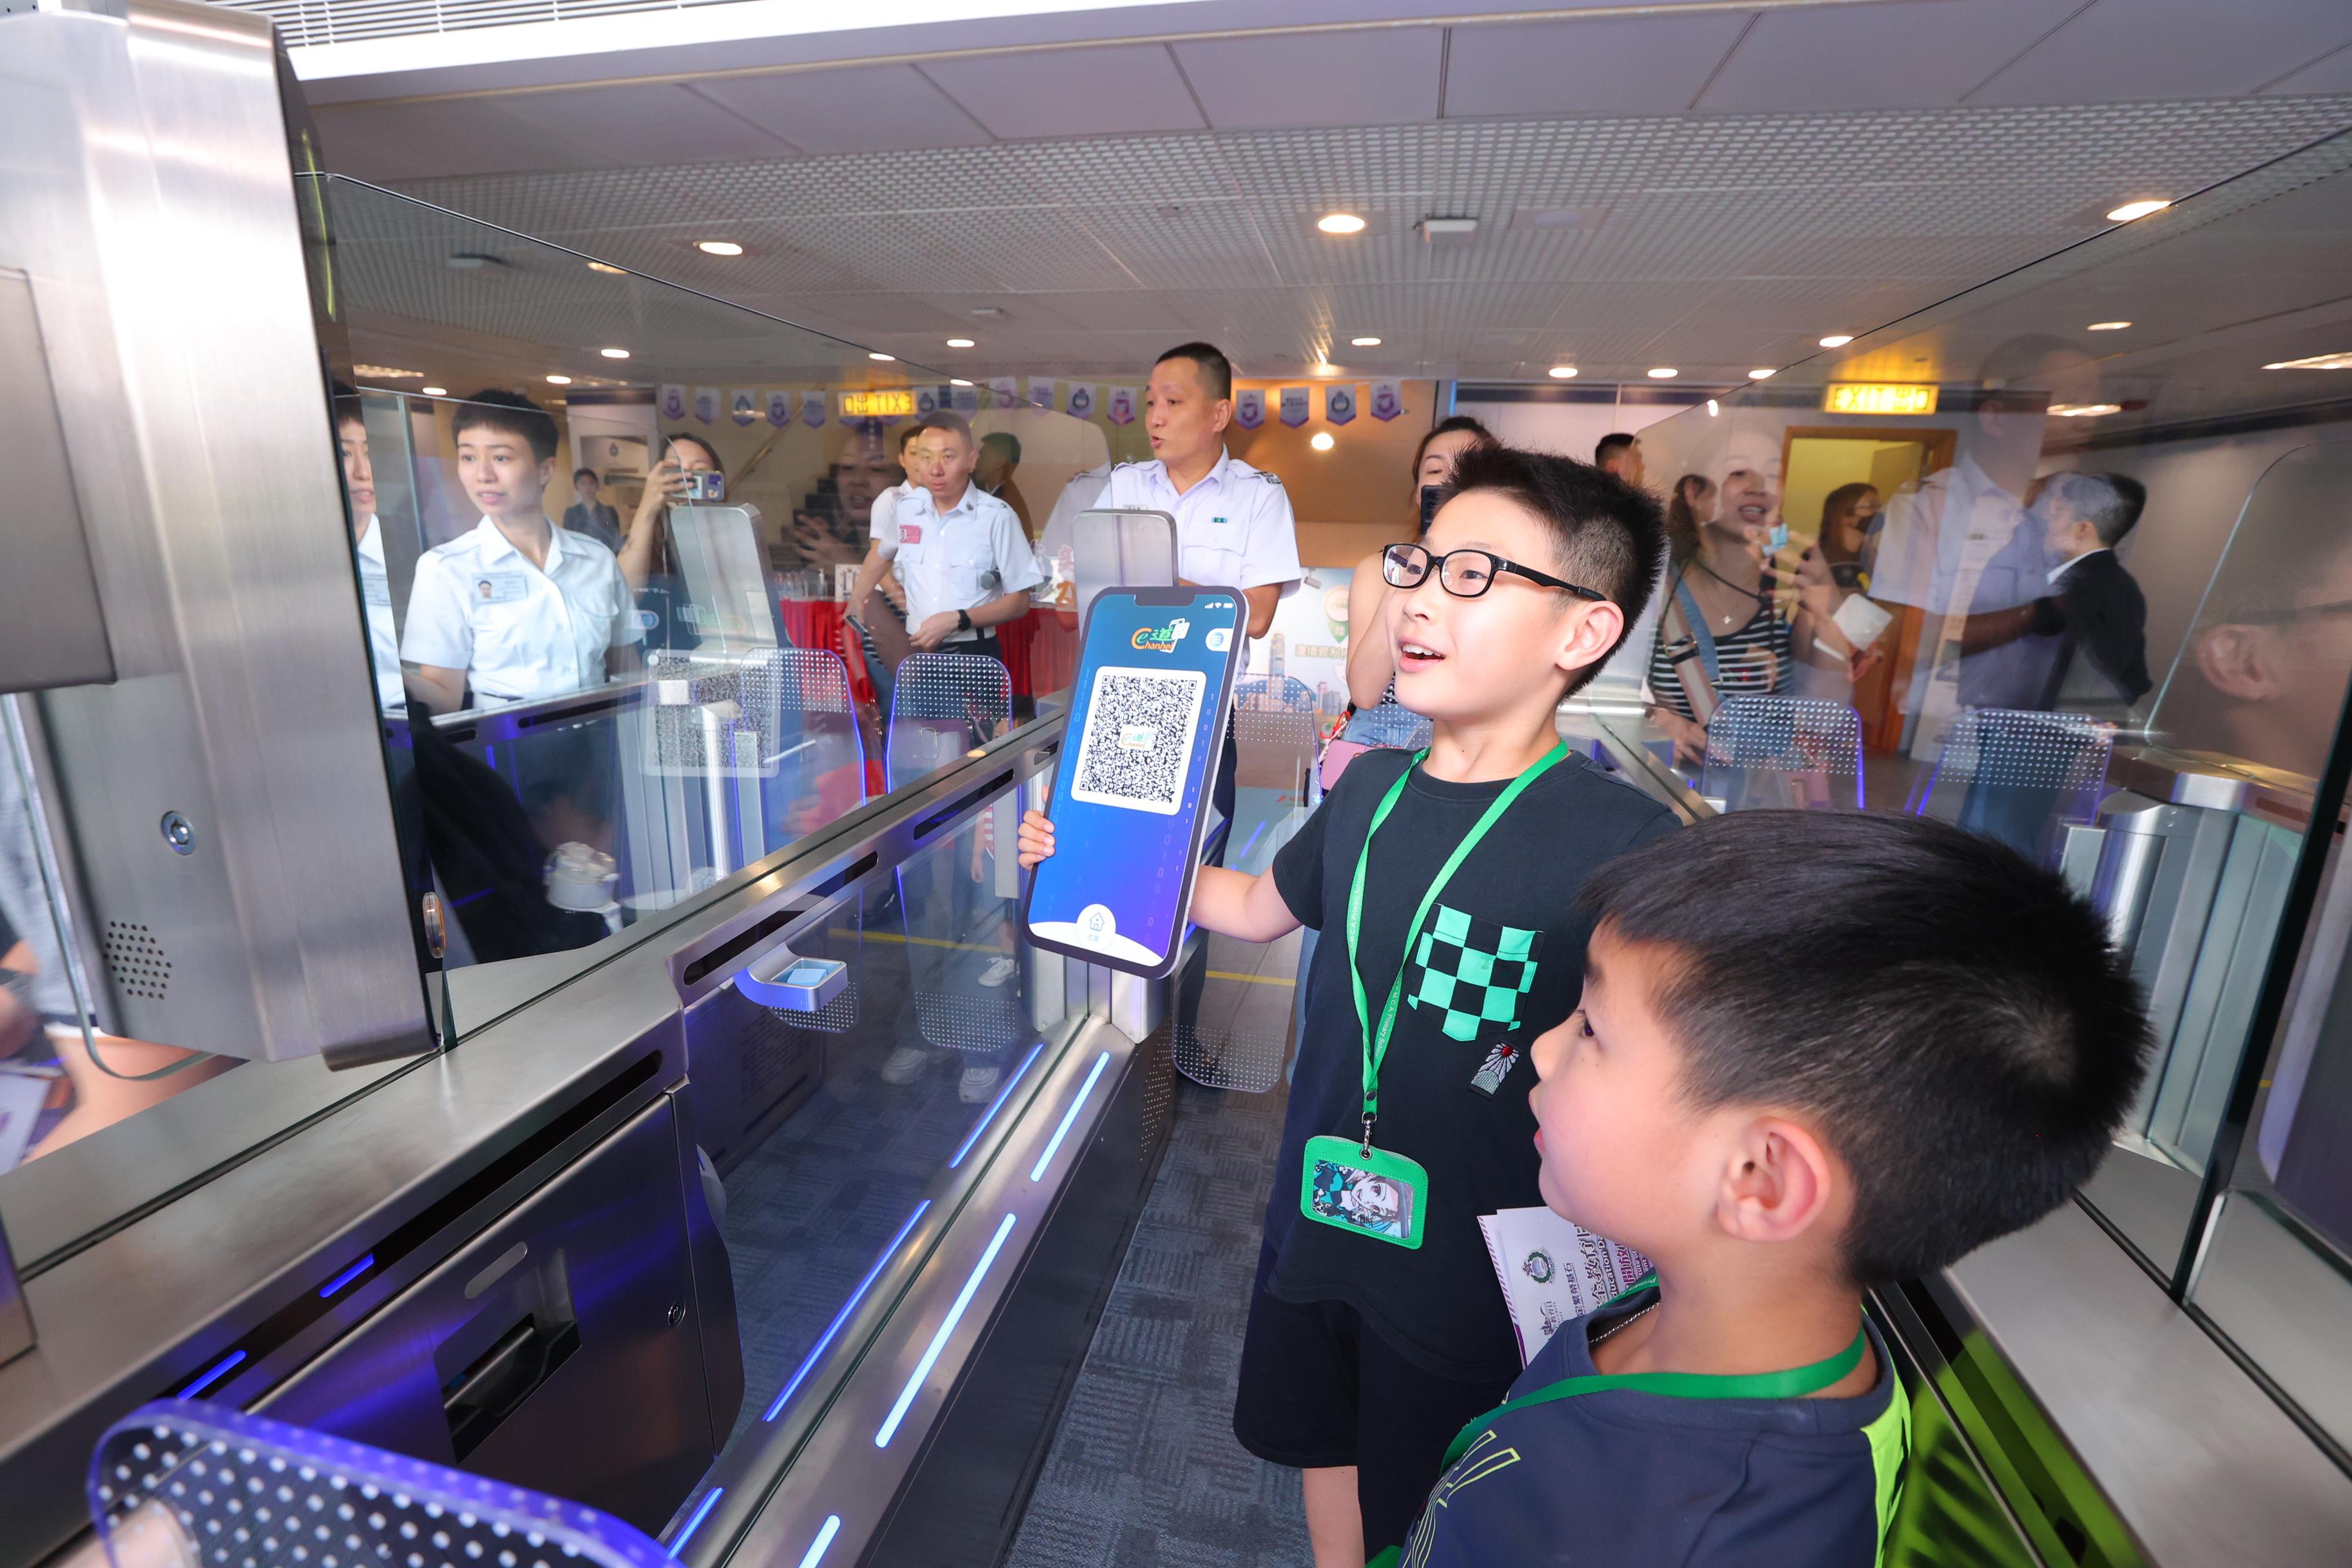 To support the National Security Education Day, the Immigration Service Institute of Training and Development held an open day today (April 15). Members of the public tried using a simulated Contactless e-Channel service.